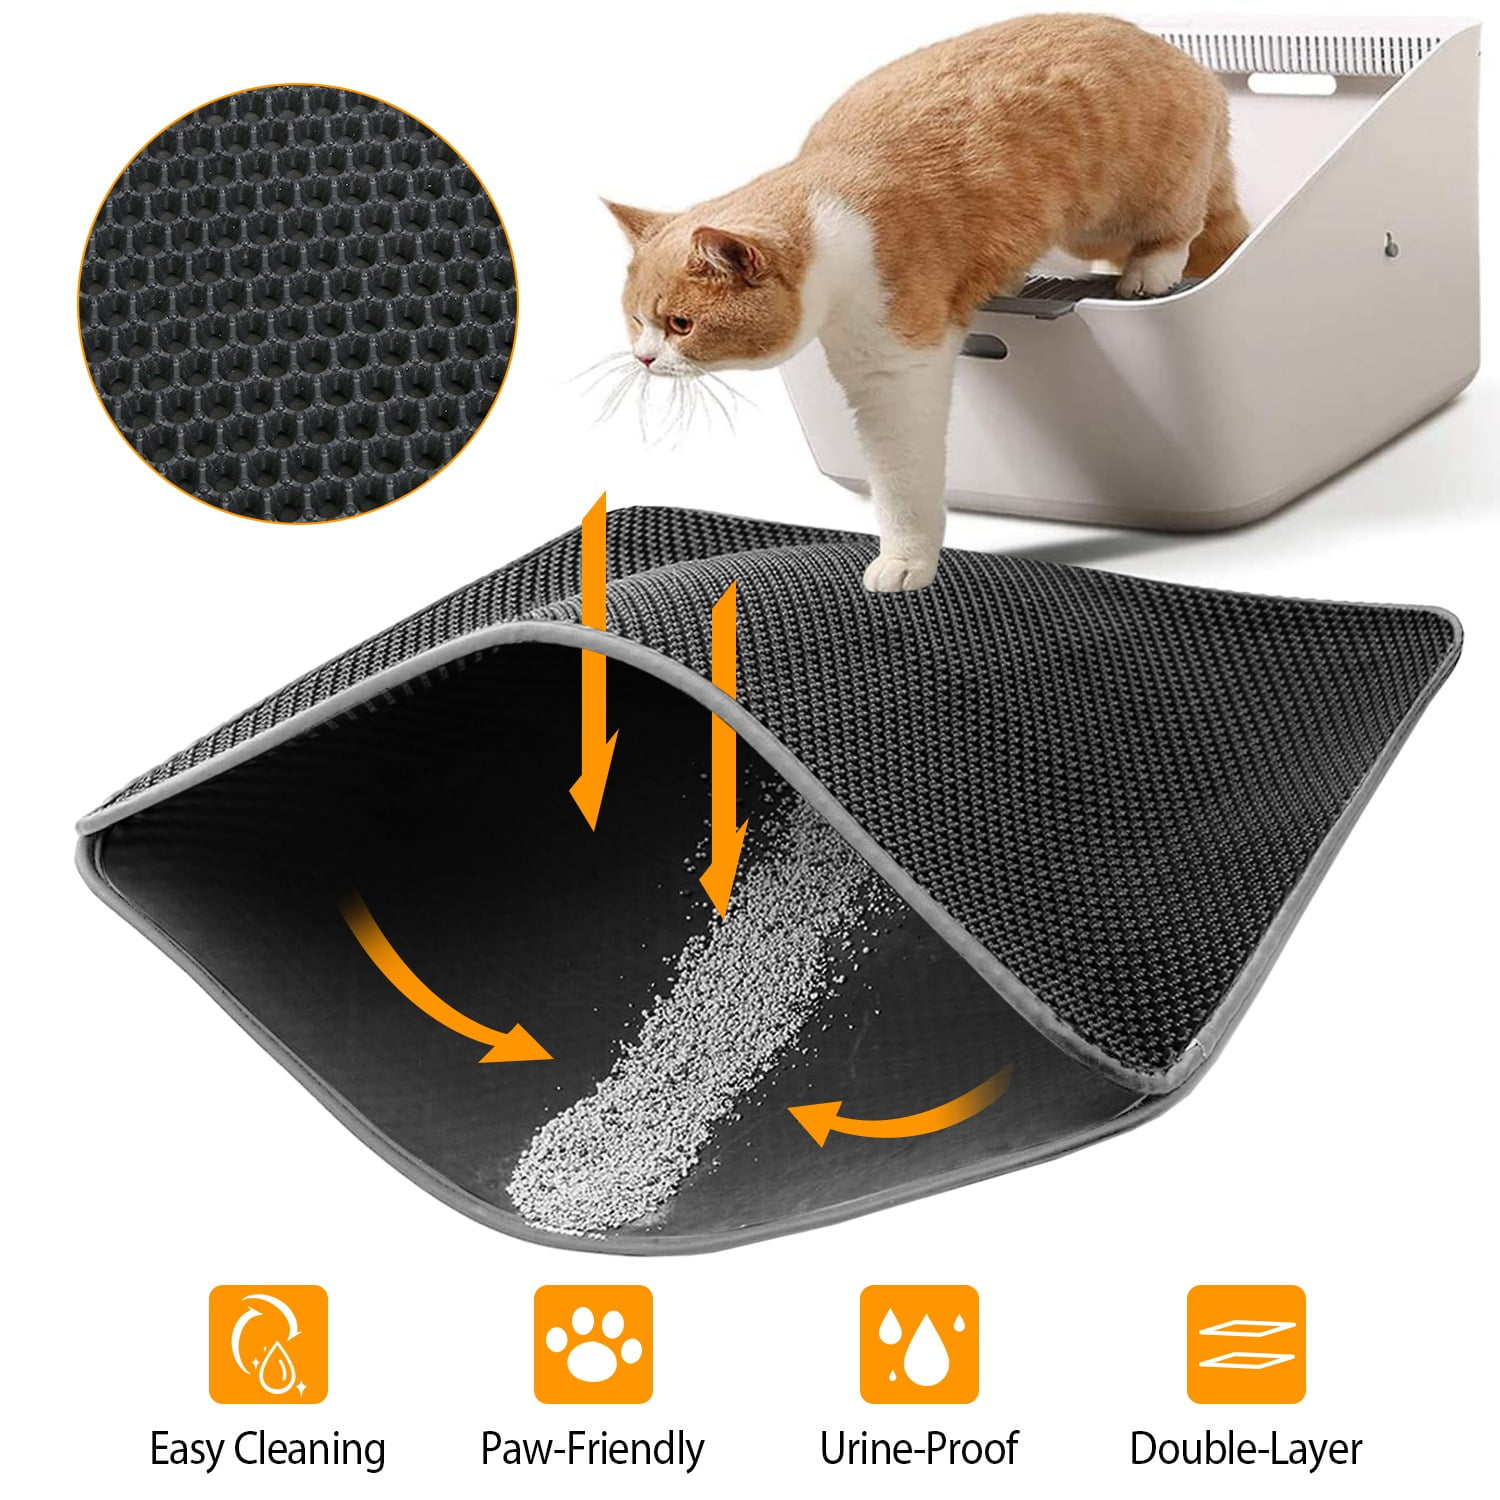 Gorilla Grip Honeycomb Cat Mat, Traps Litter, Two Layer Trapping Kitty Mats,  Less Waste, Soft On Paws, Indoor Box Supplies and Essentials, Feeding Trap,  Water Resistant on Floors, 30x24 Light Blue 